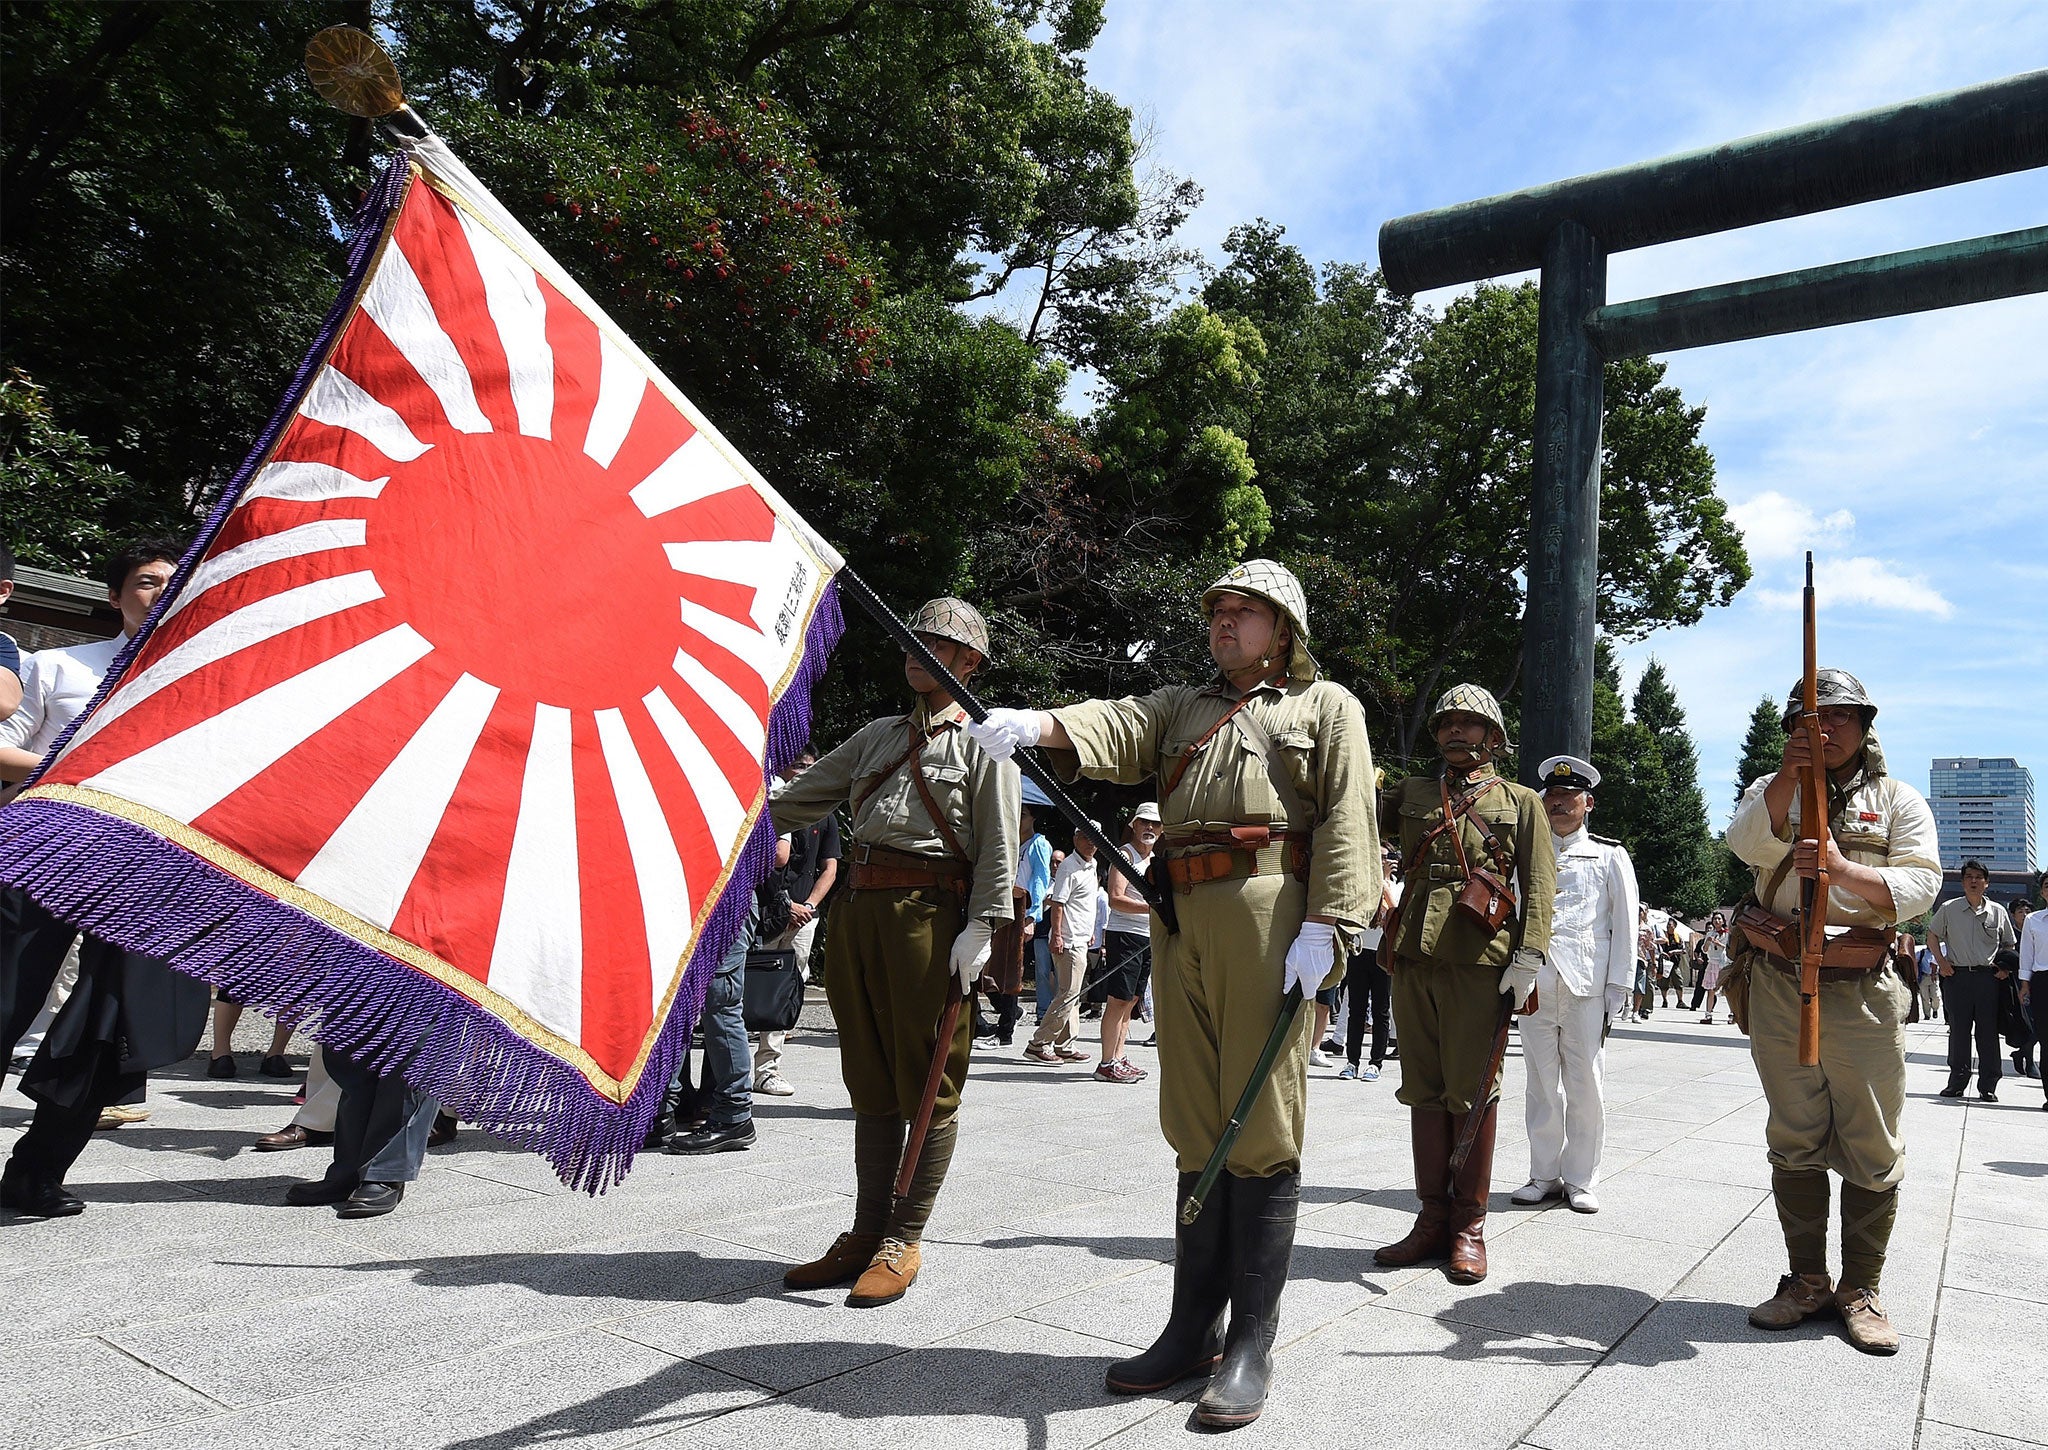 Japanese men parade around the controversial Yasukuni shrine, which remembers those who died in service of the Empire of Japan